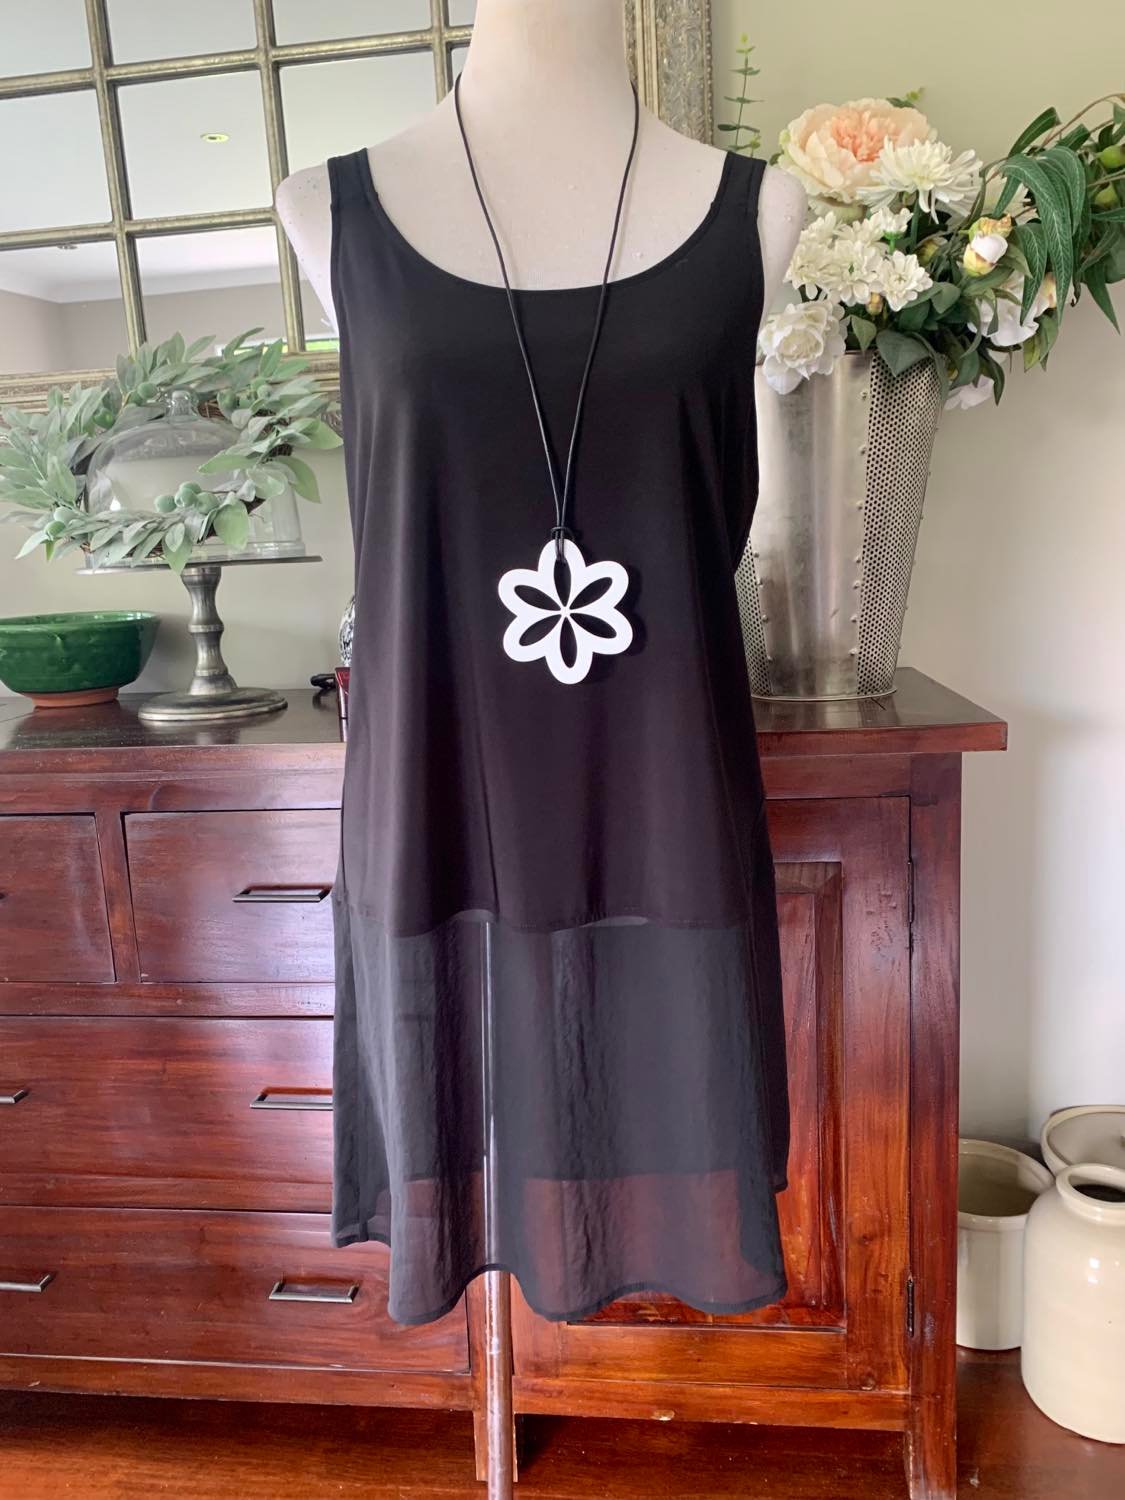 Short Layering Singlet with a Mid Length Georgette Skirt - Black and White, Essential Basics by Cashews 10-26